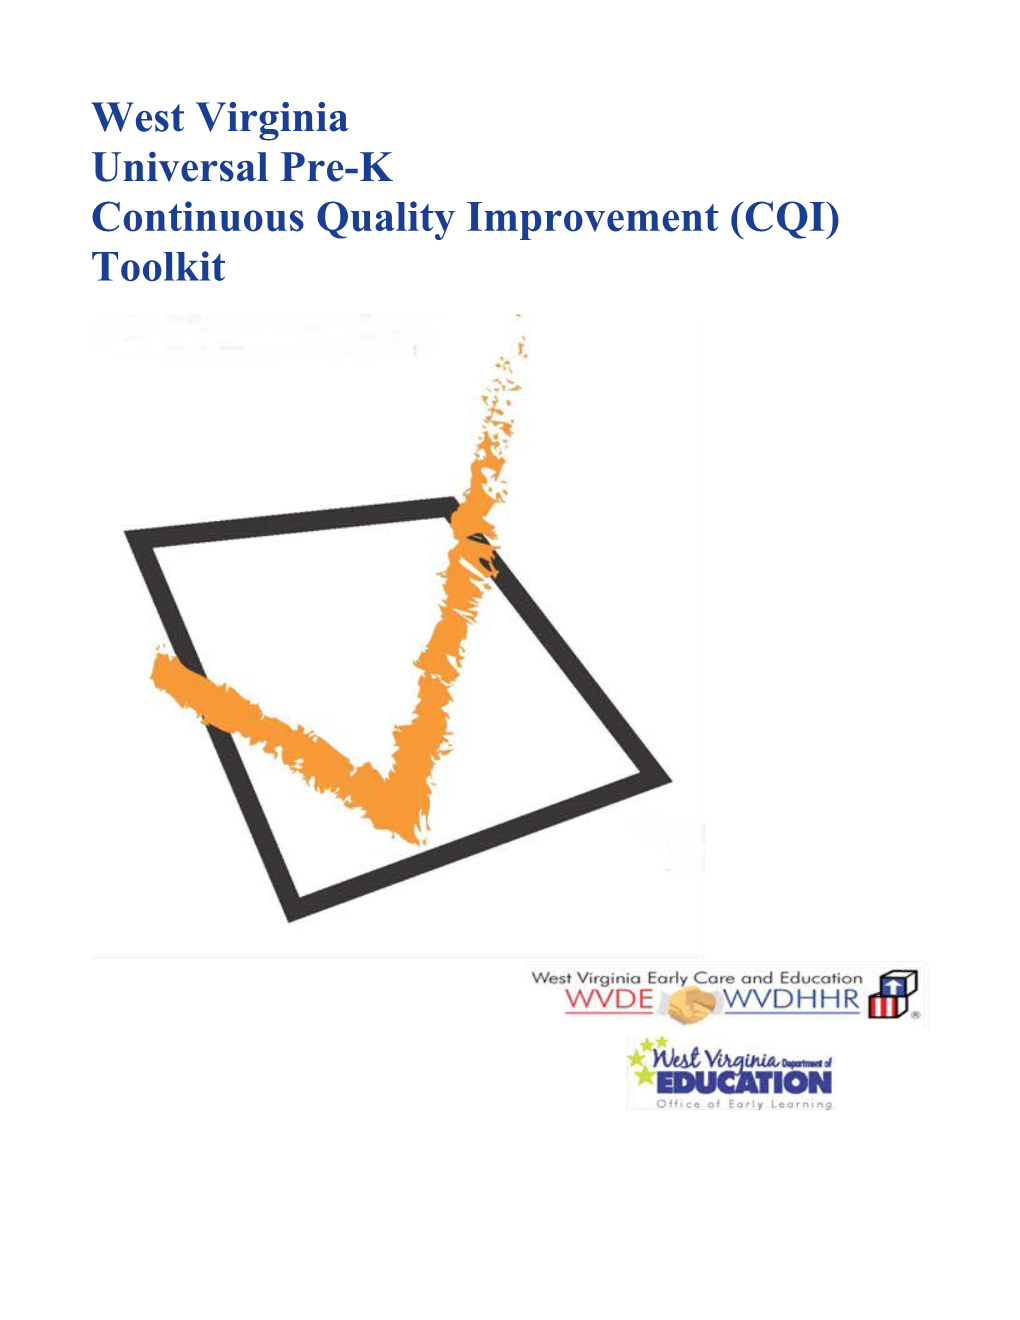 Continuous Quality Improvement (CQI) Toolkit